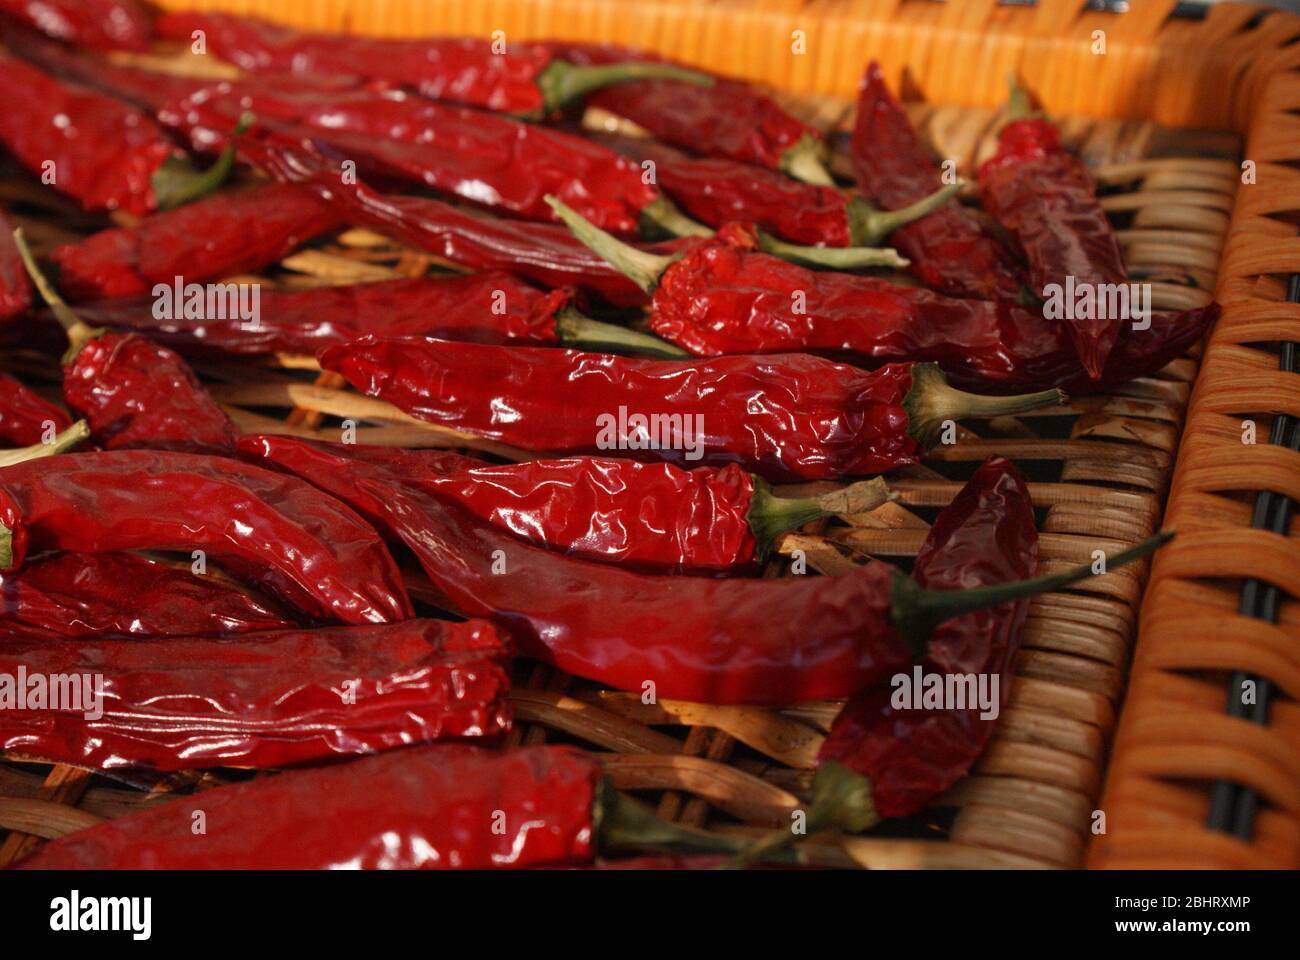 Red hot chili peppers drying in the sun on a wicker basket tray Stock Photo